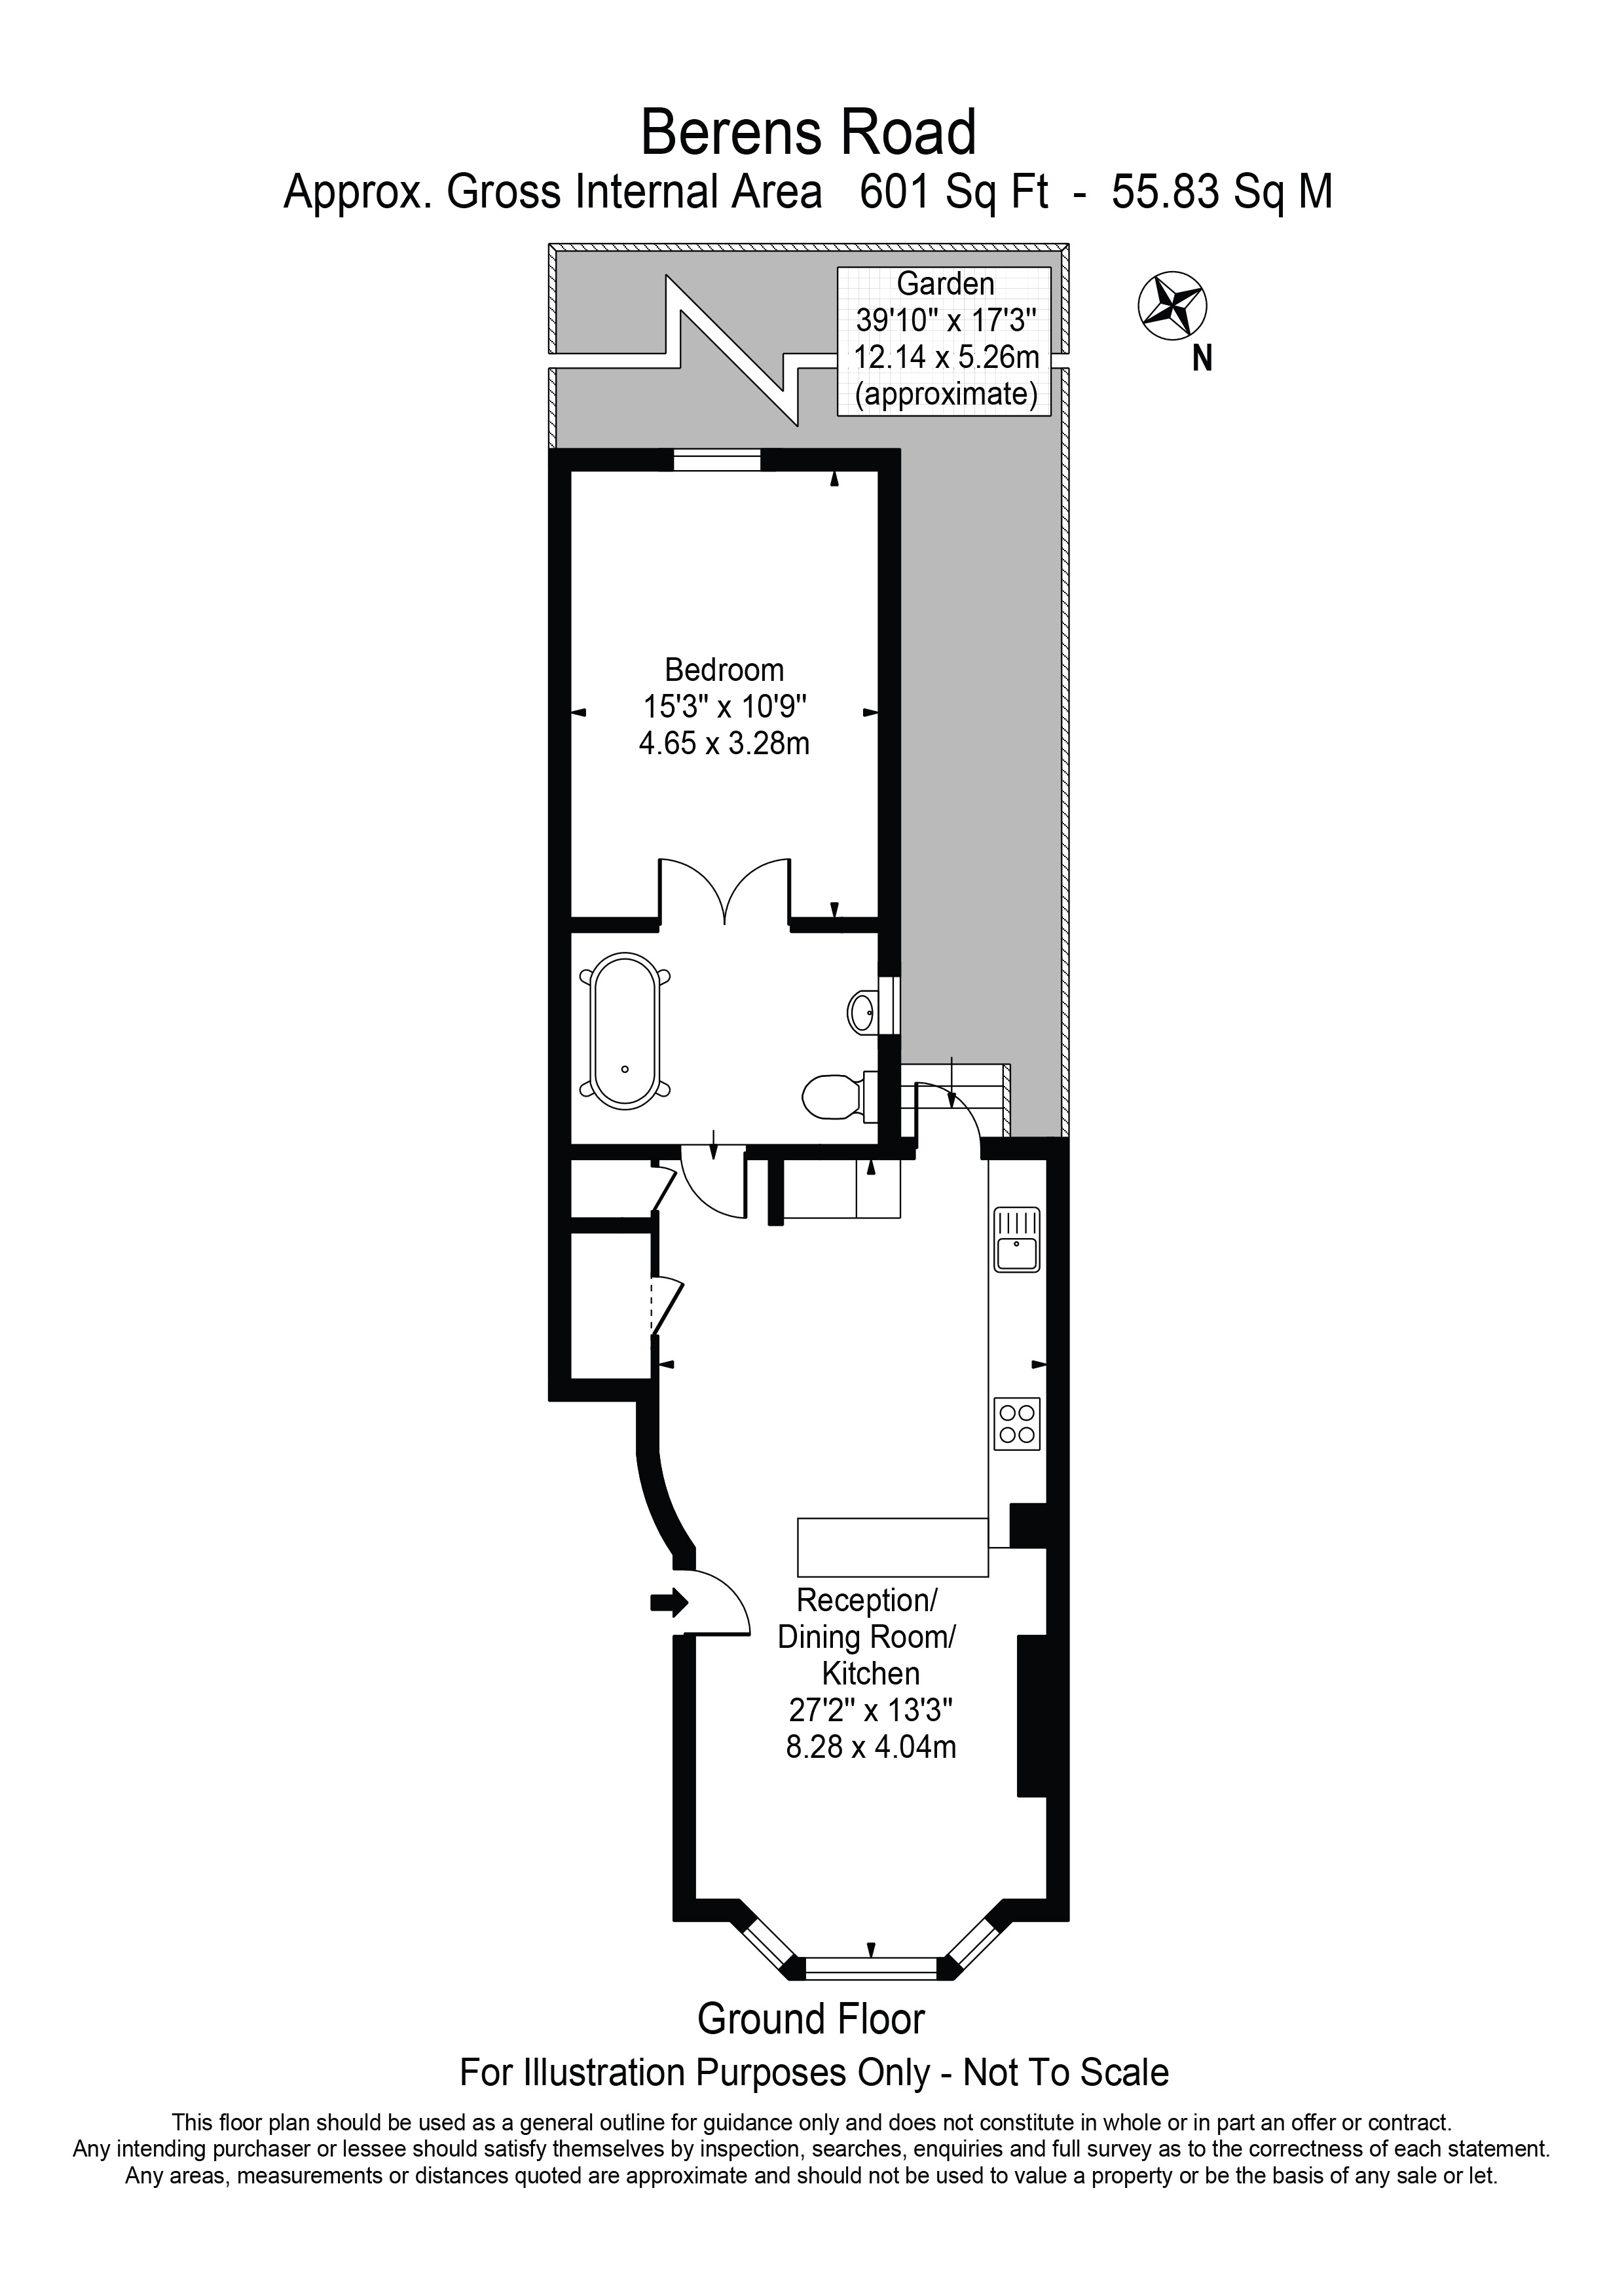 1 bed apartment for sale in Berens Road, London - Property floorplan